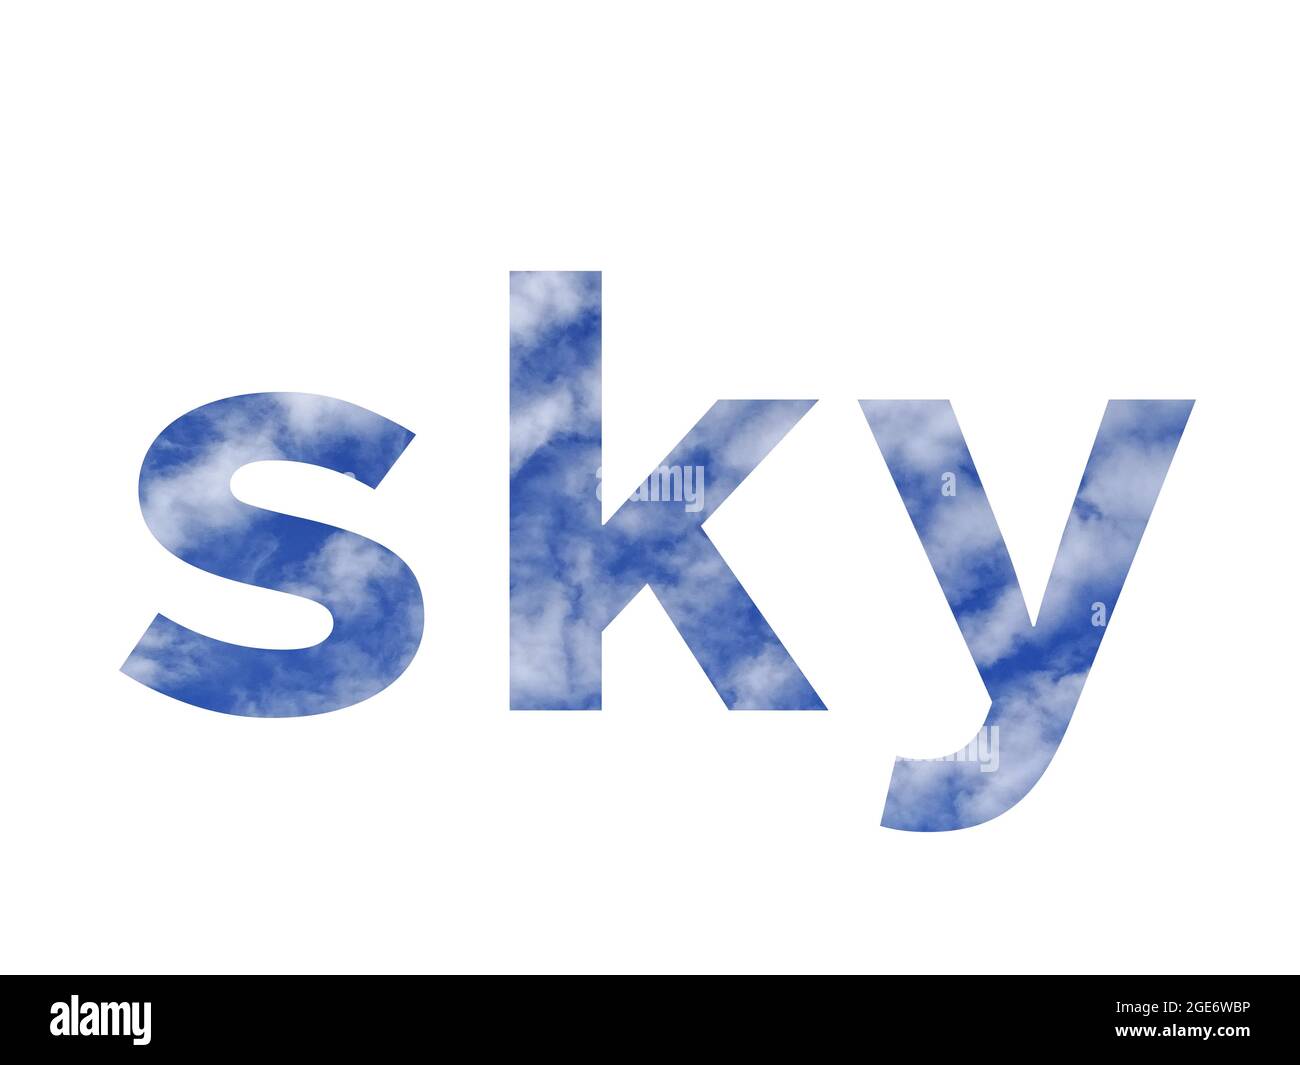 SKY, text made with letters of the alphabet made with a blue sky and white clouds, isolated on a white background Stock Photo